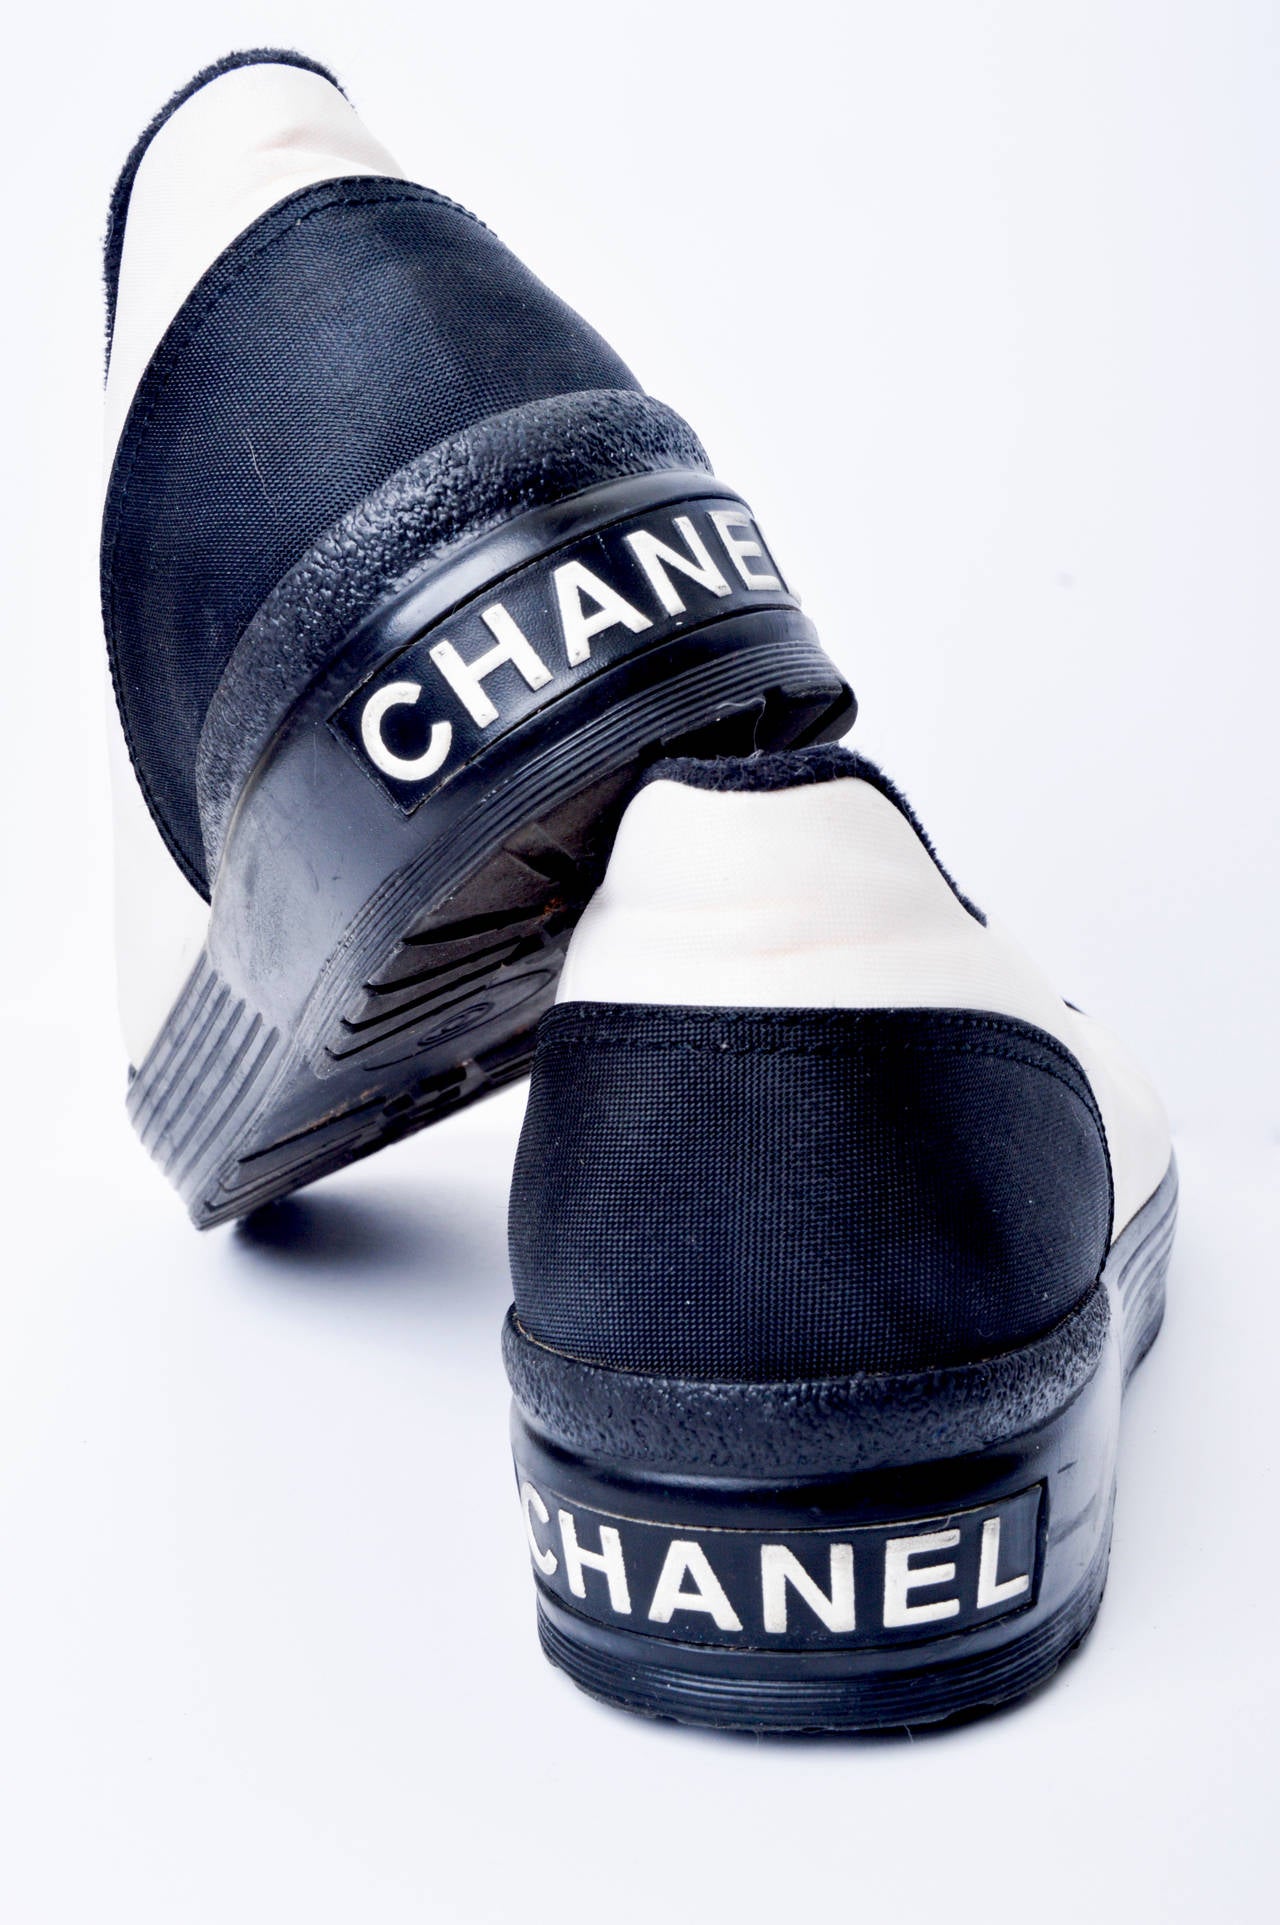 Chanel Black and Off-White Athletic Shoes Size 38 2